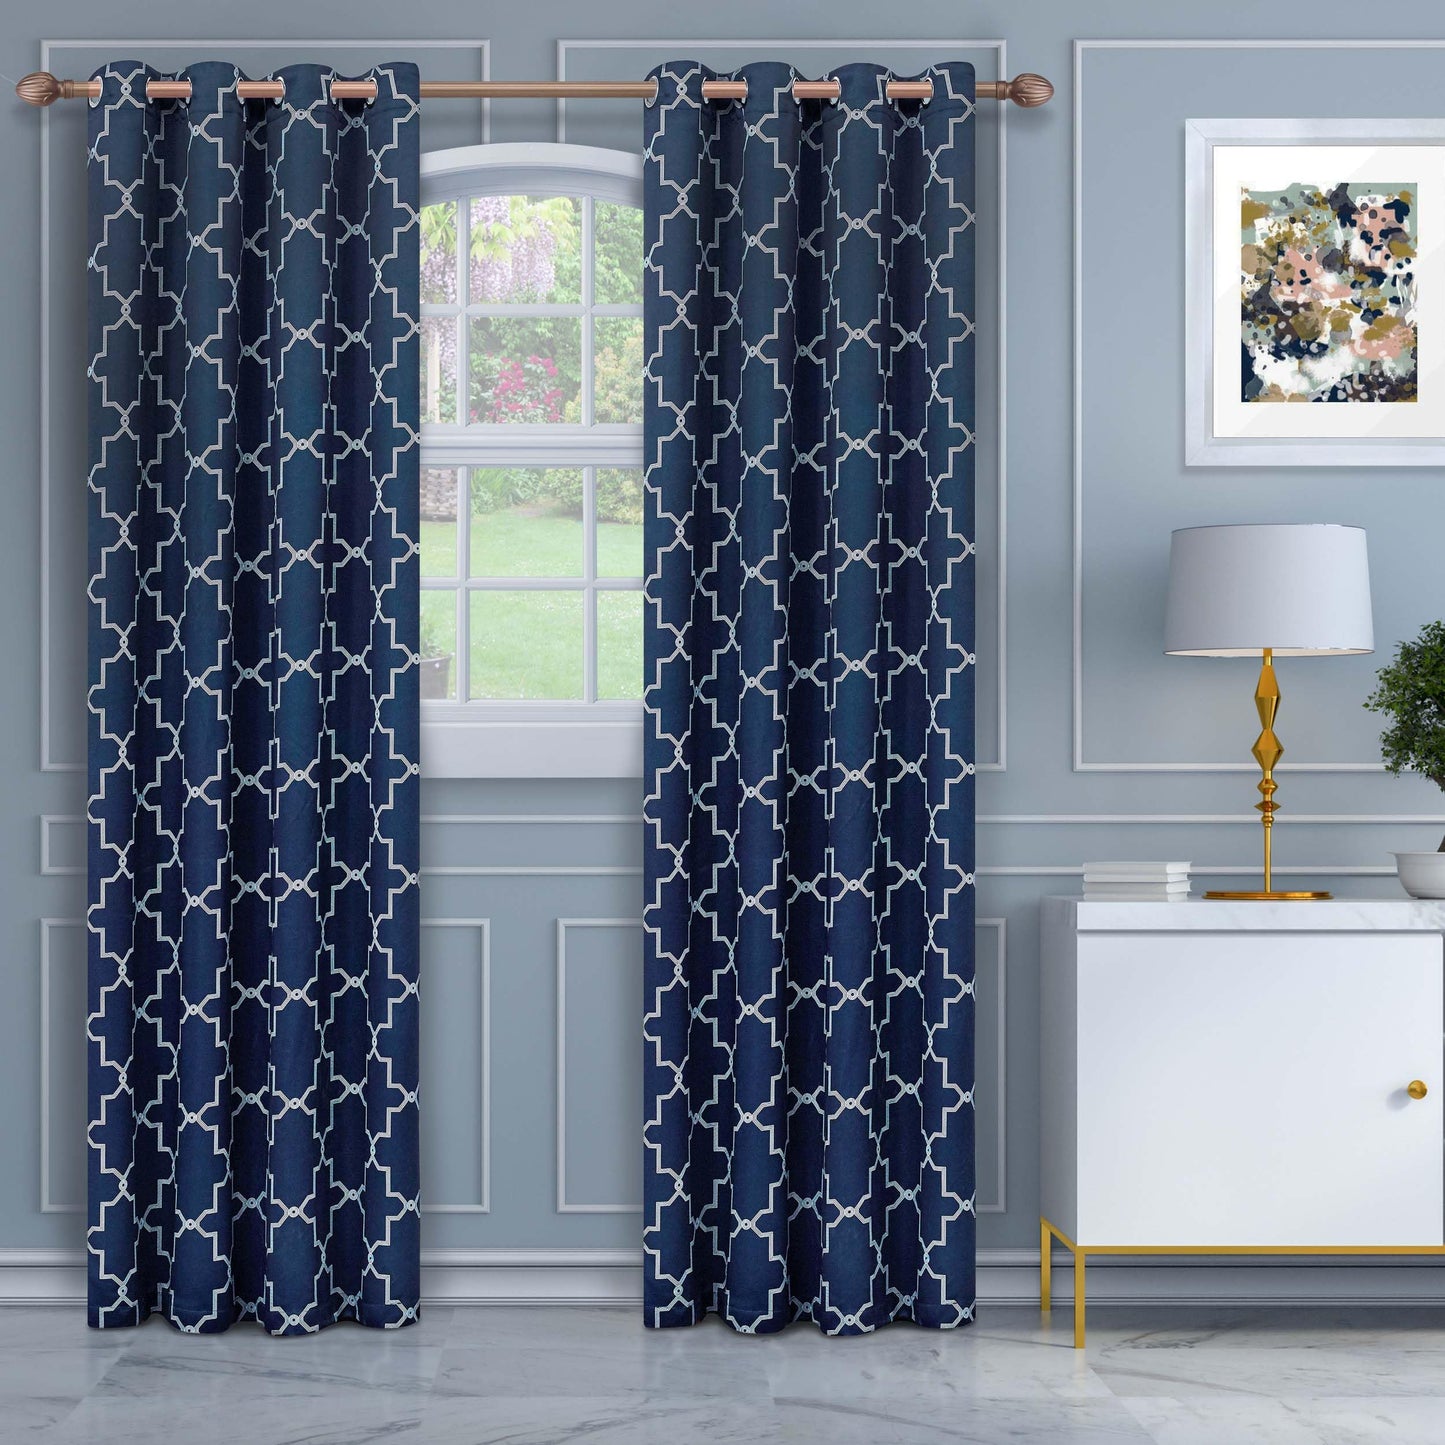 Superior Soft Quality Woven, Imperial Trellis Blackout Thermal Grommet Curtain Panel Pair